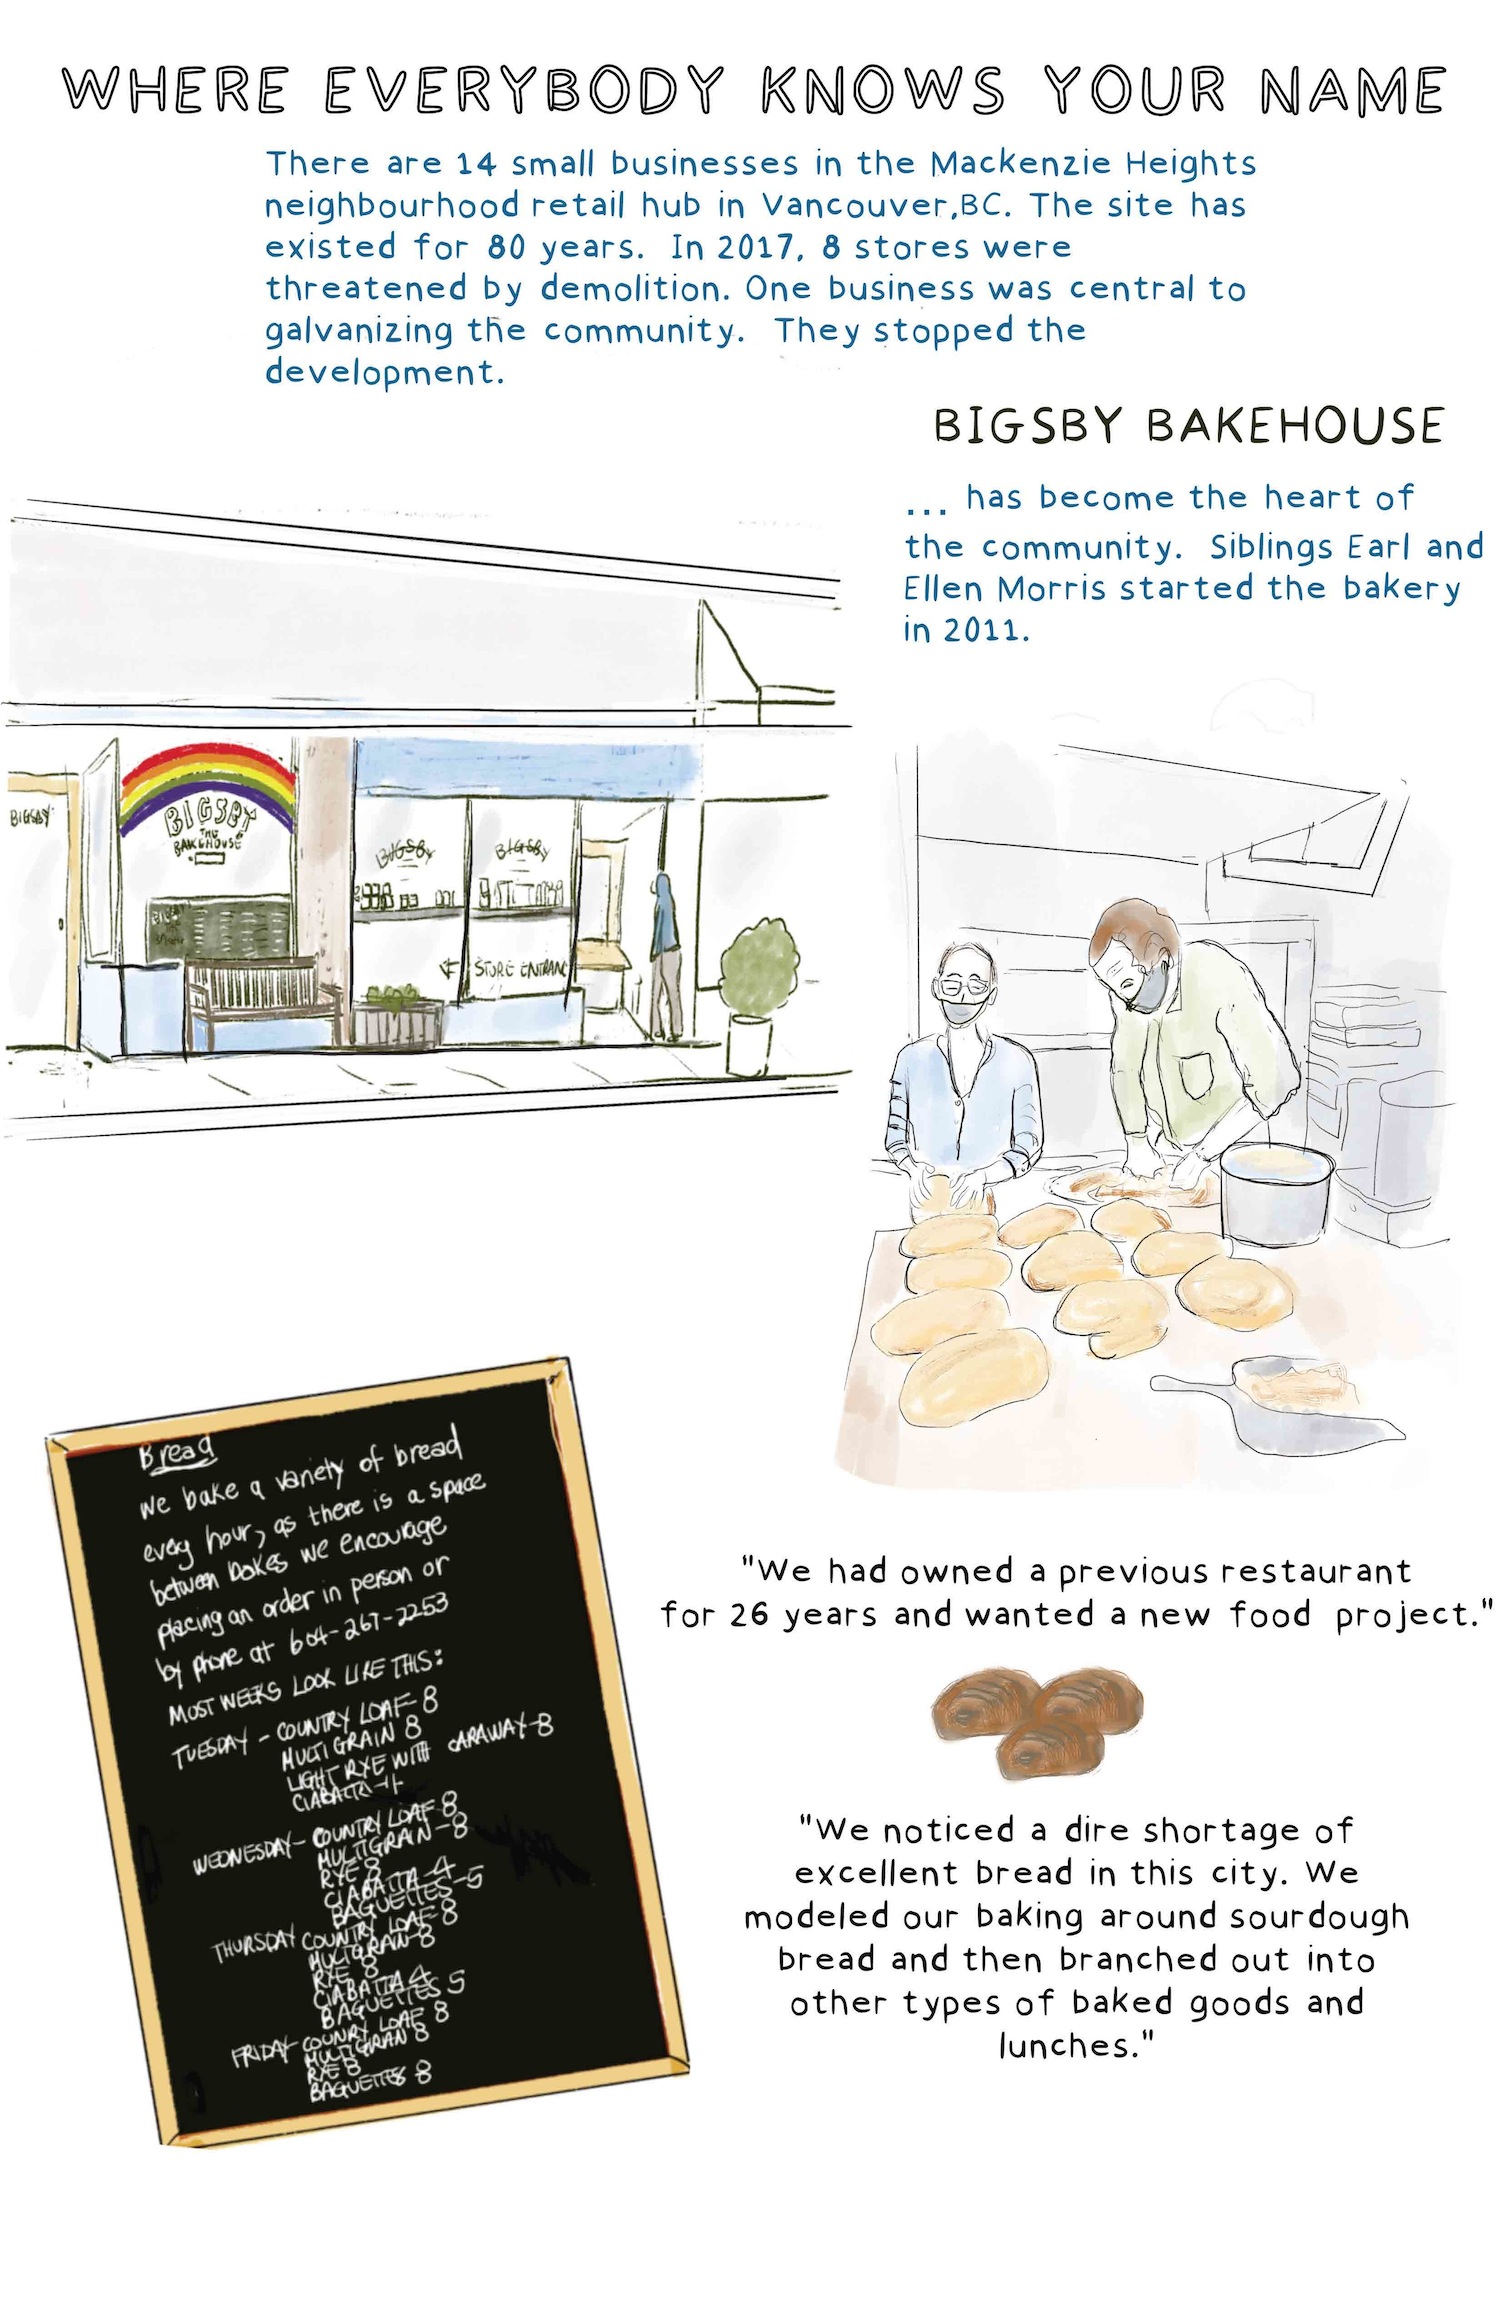 image - Bigsby the Bakehouse story in art and words, page 1